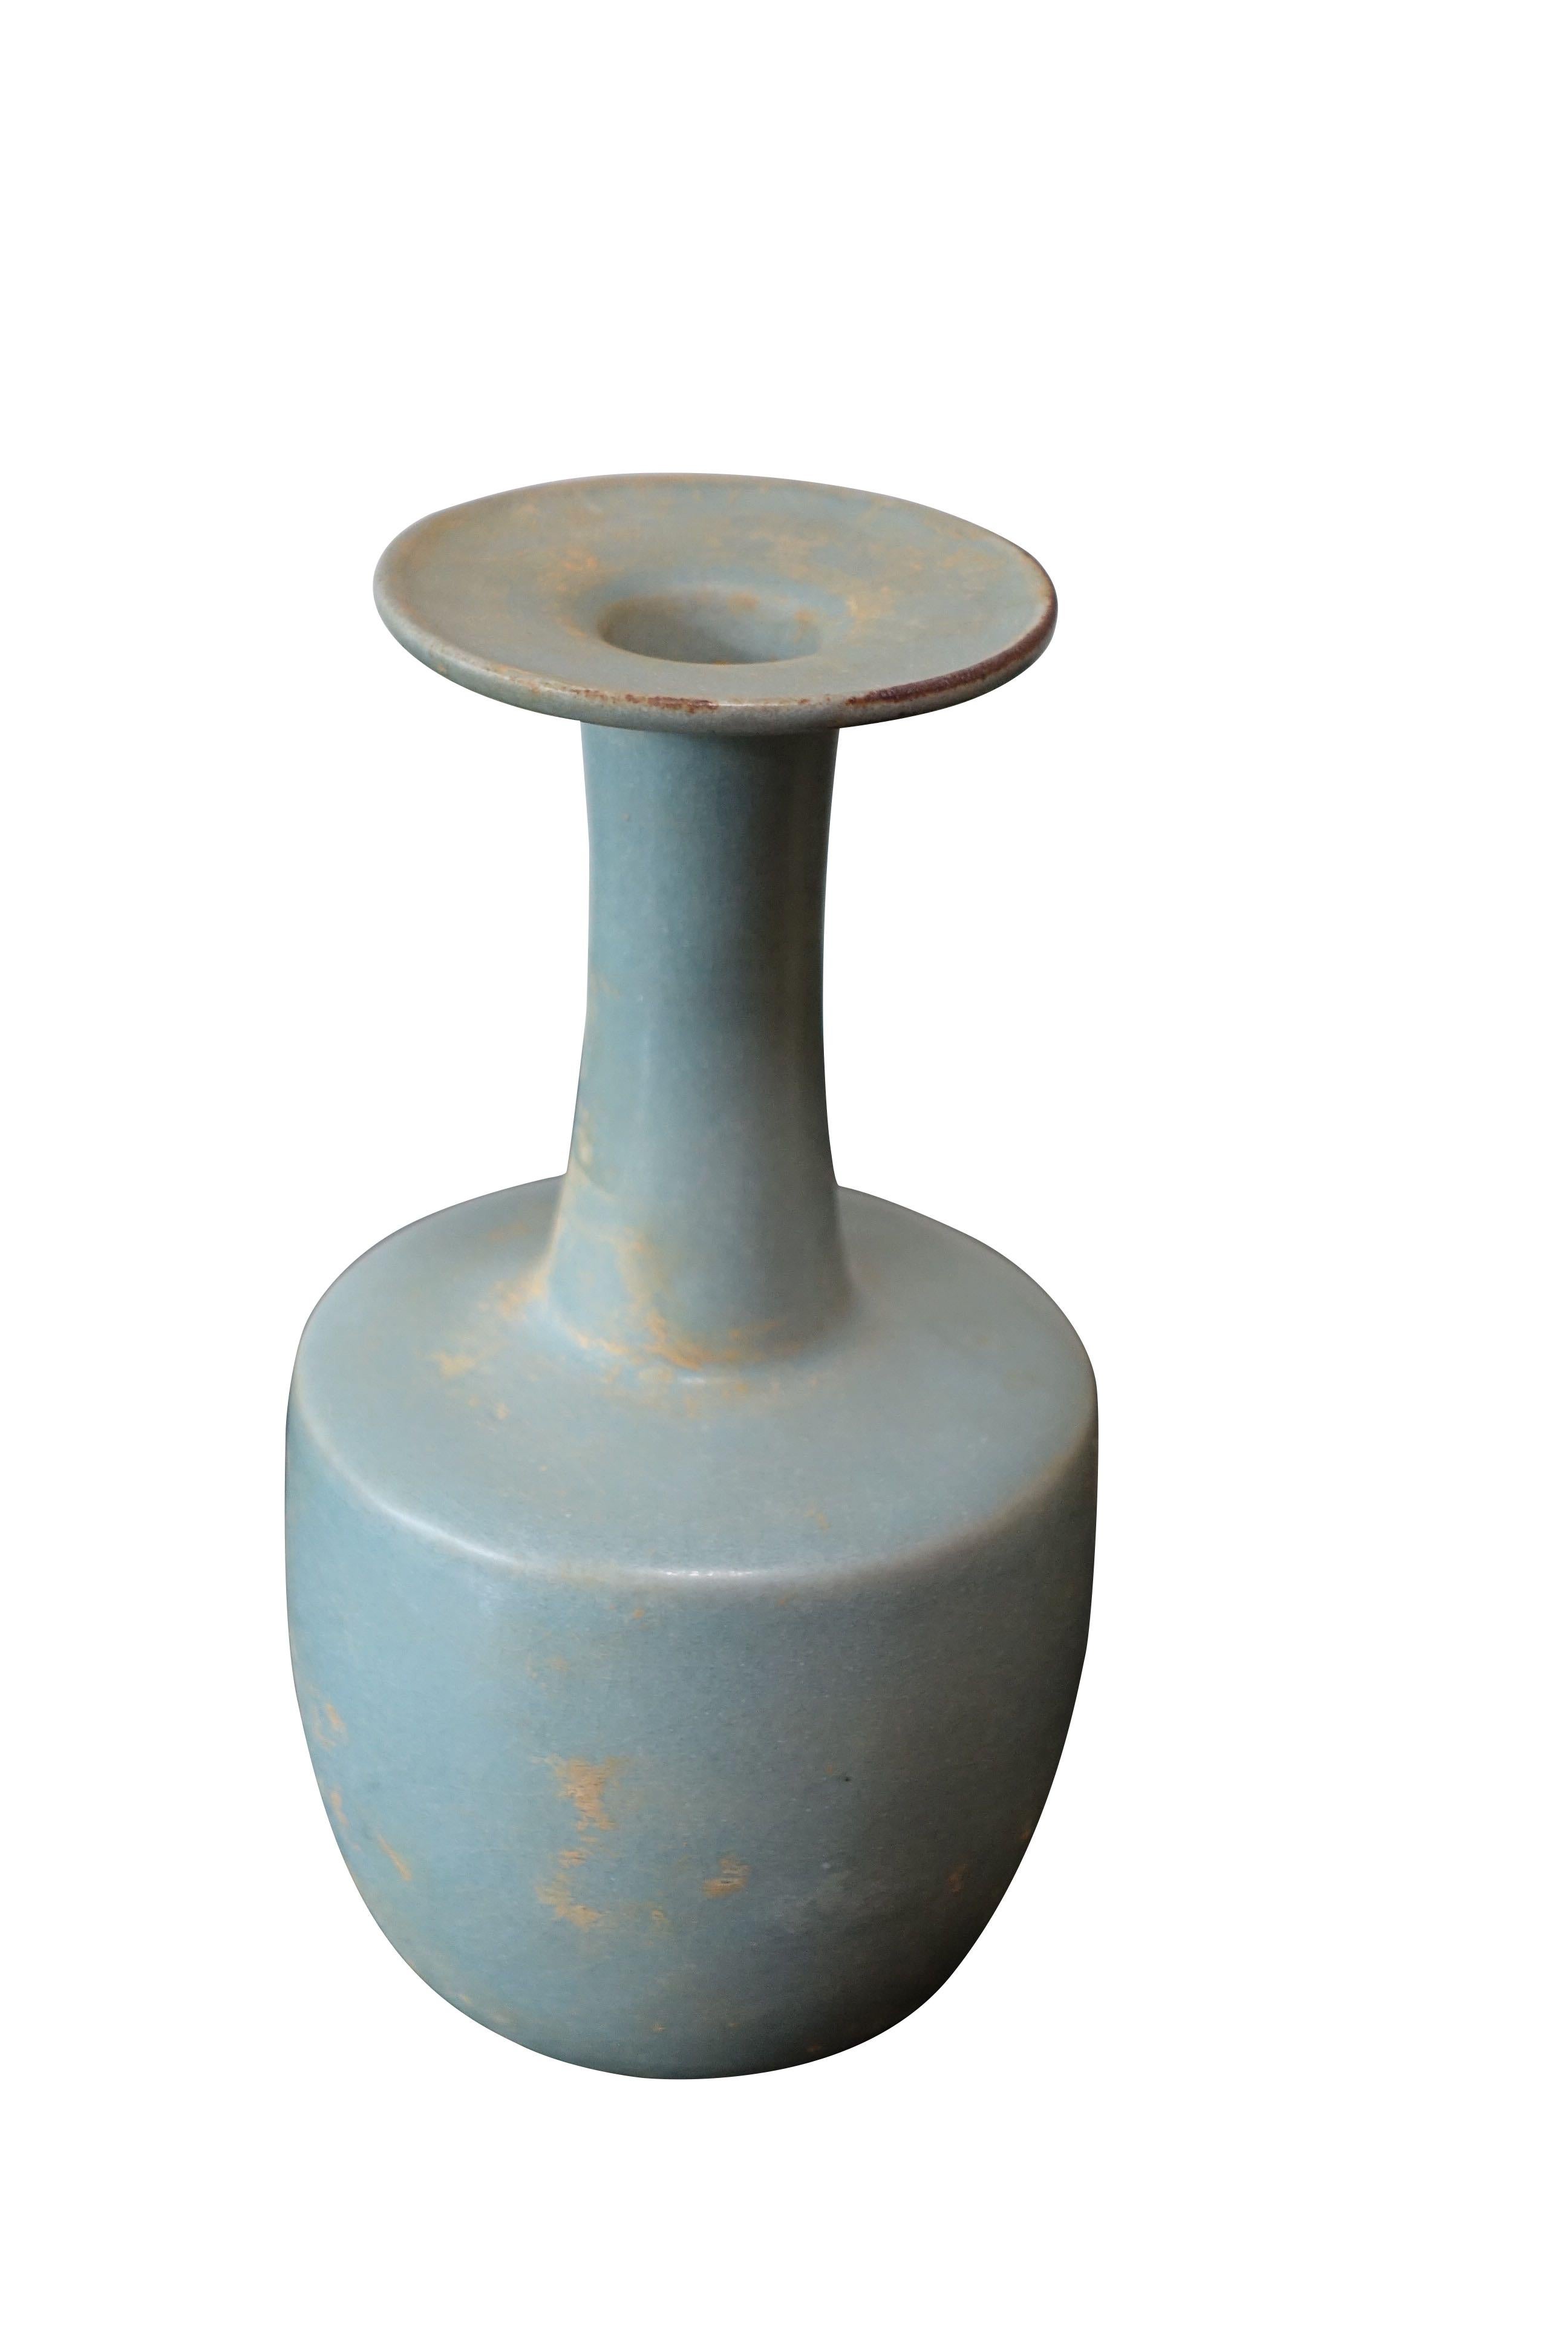 Contemporary Chinese collection of varying styles matte finish pale turquoise vases.
Sizes range from 3.5